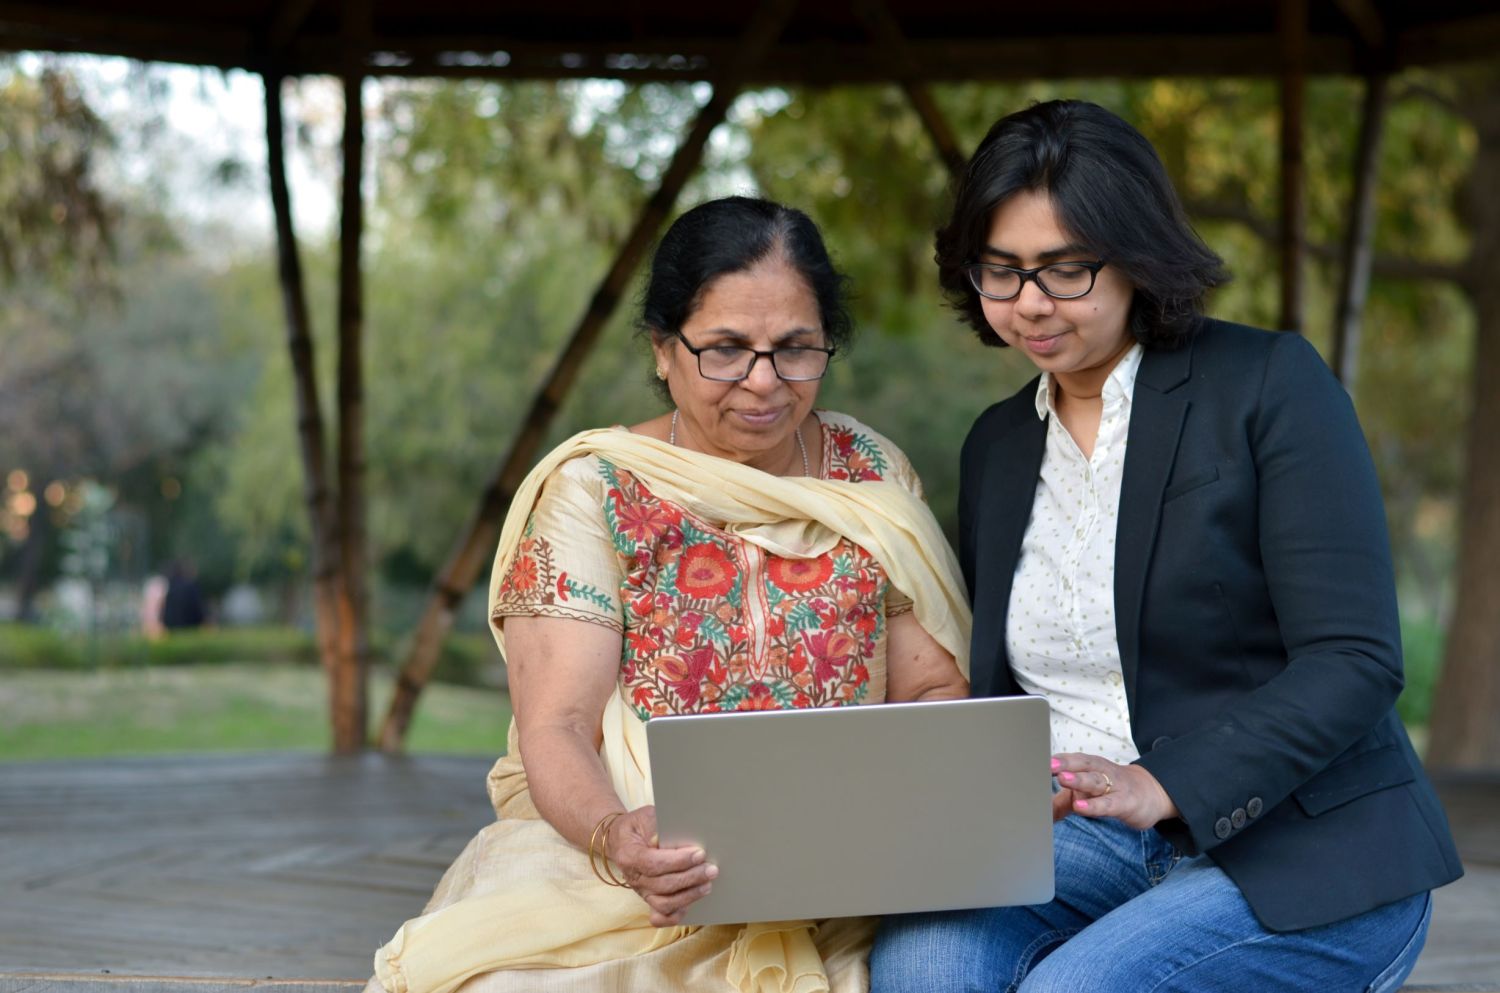 Two women in India work on a computer together.